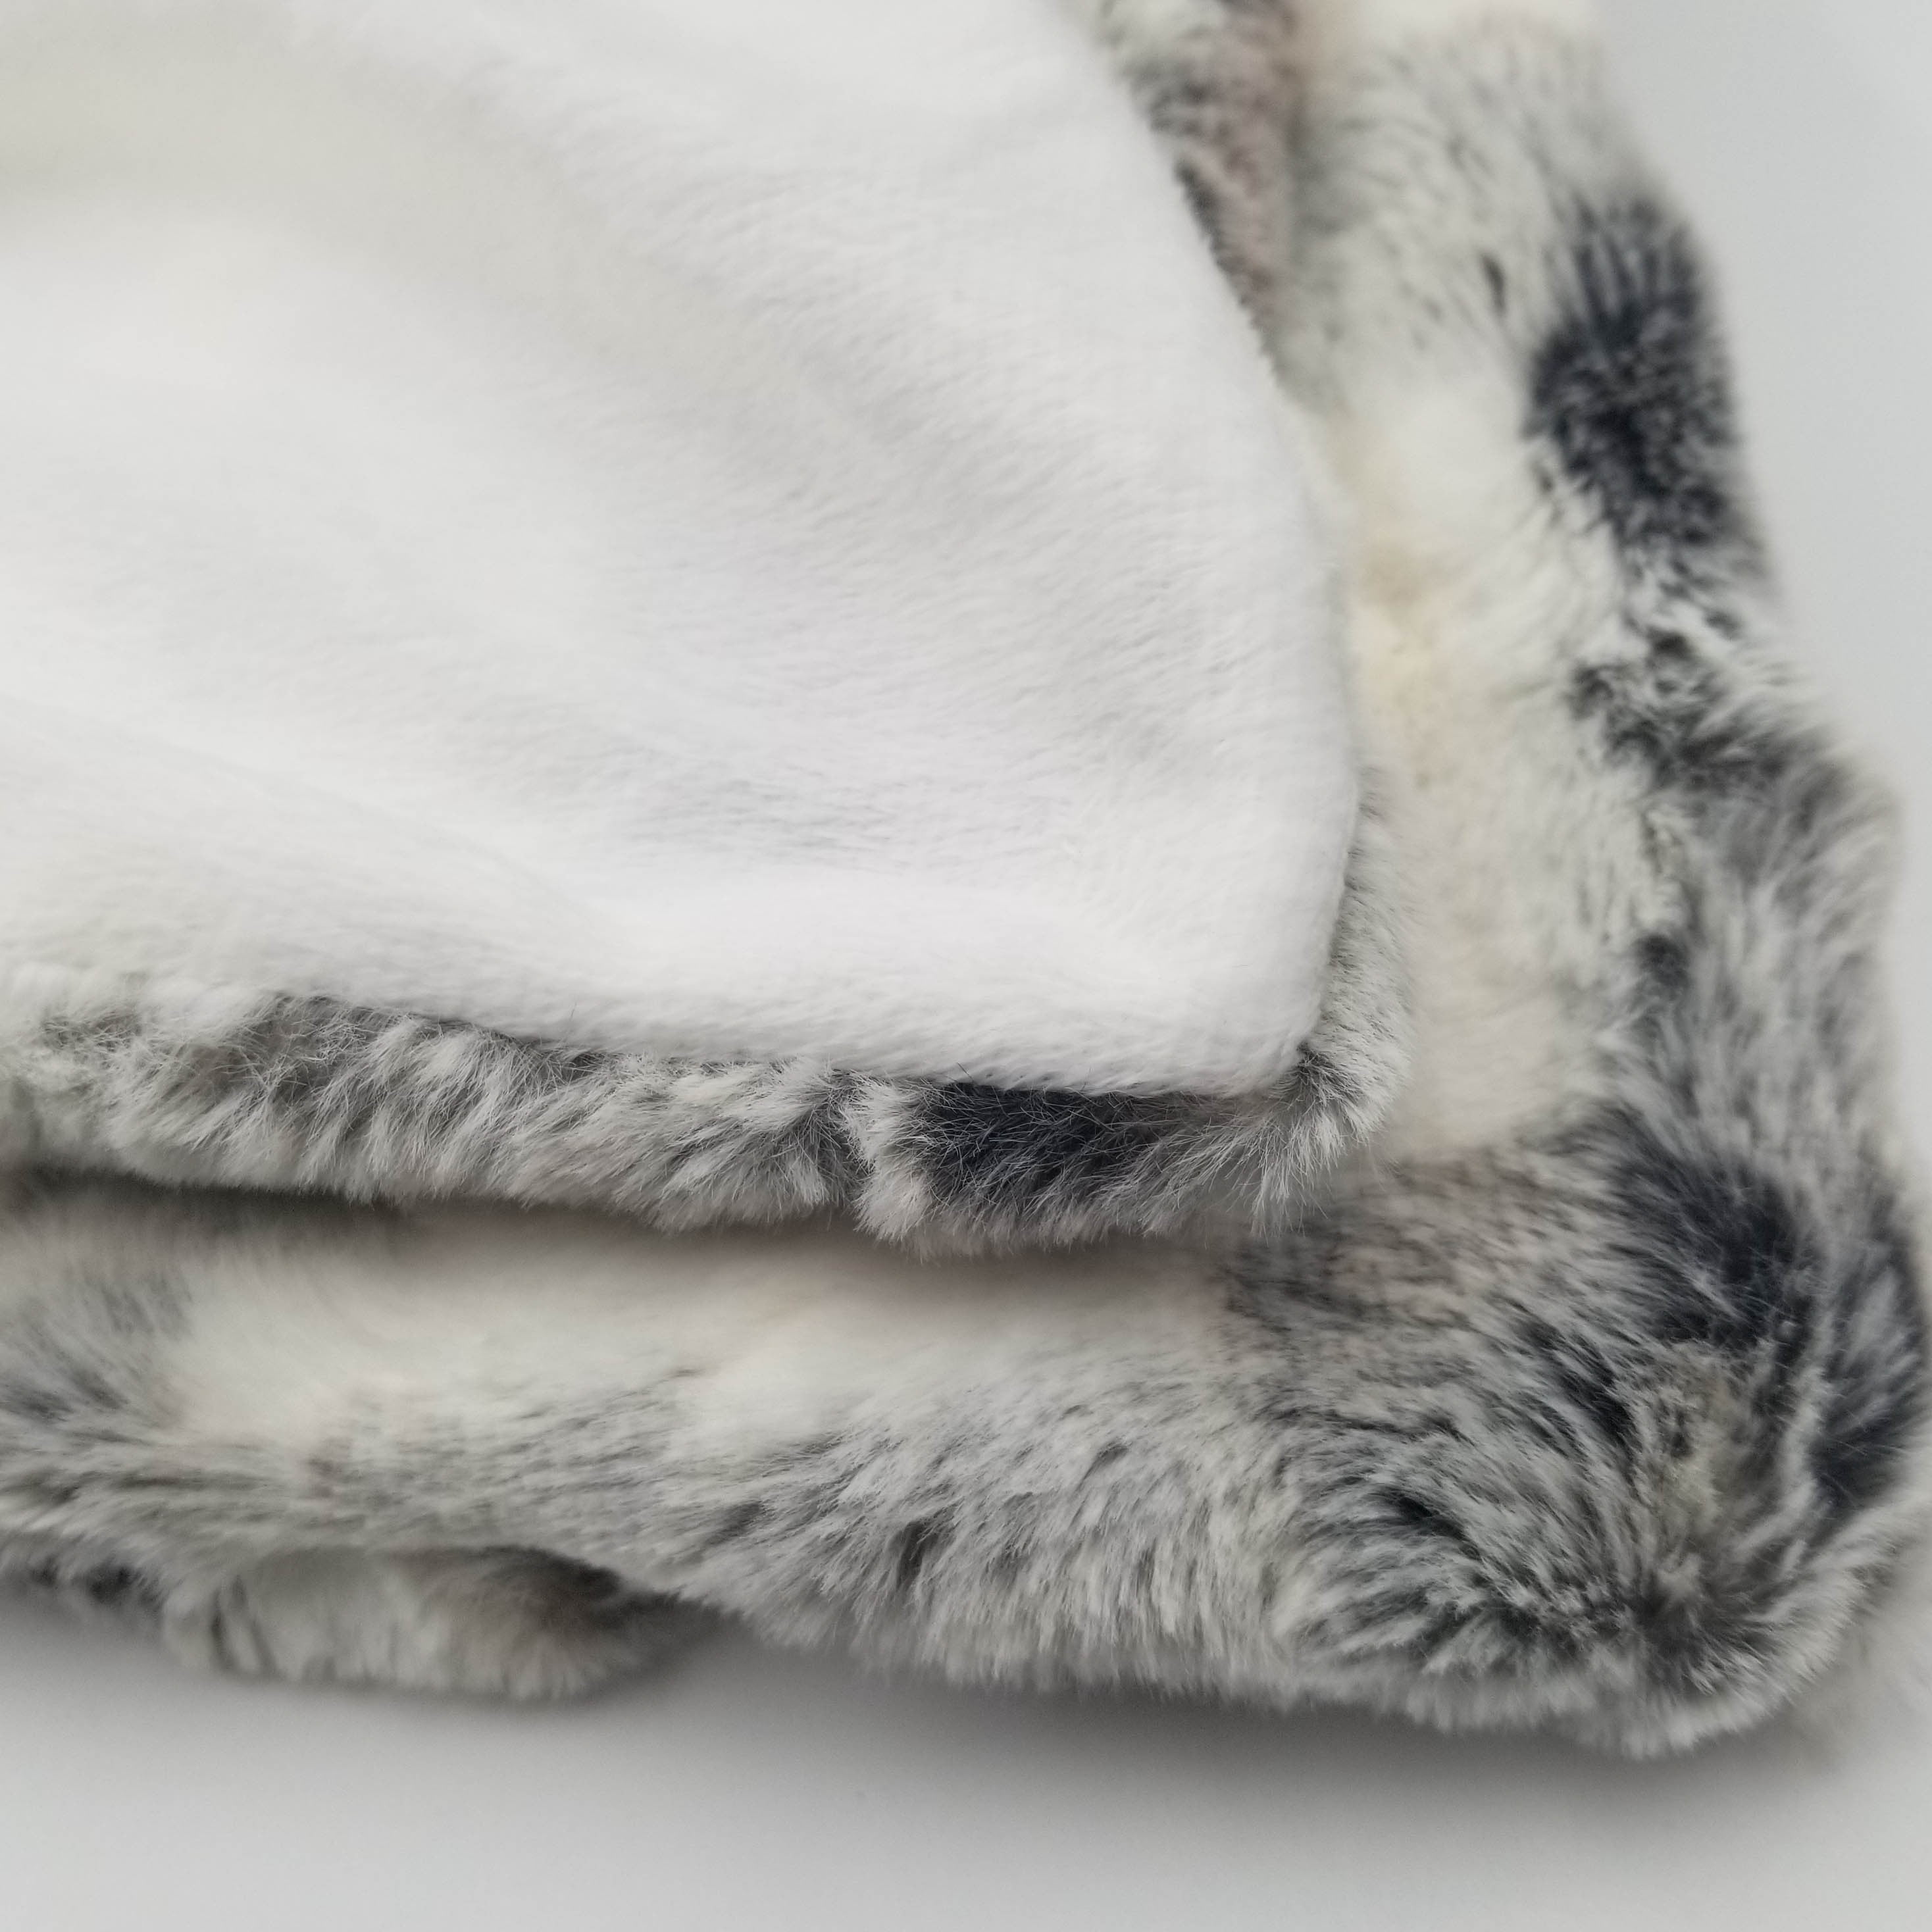 Grey White Spotted Faux Fur Throw Blanket With Sherpa Backing Throw Blanket 50x 60 Pilow Size 18x18 Filler Not Included Walmartcom Walmartcom